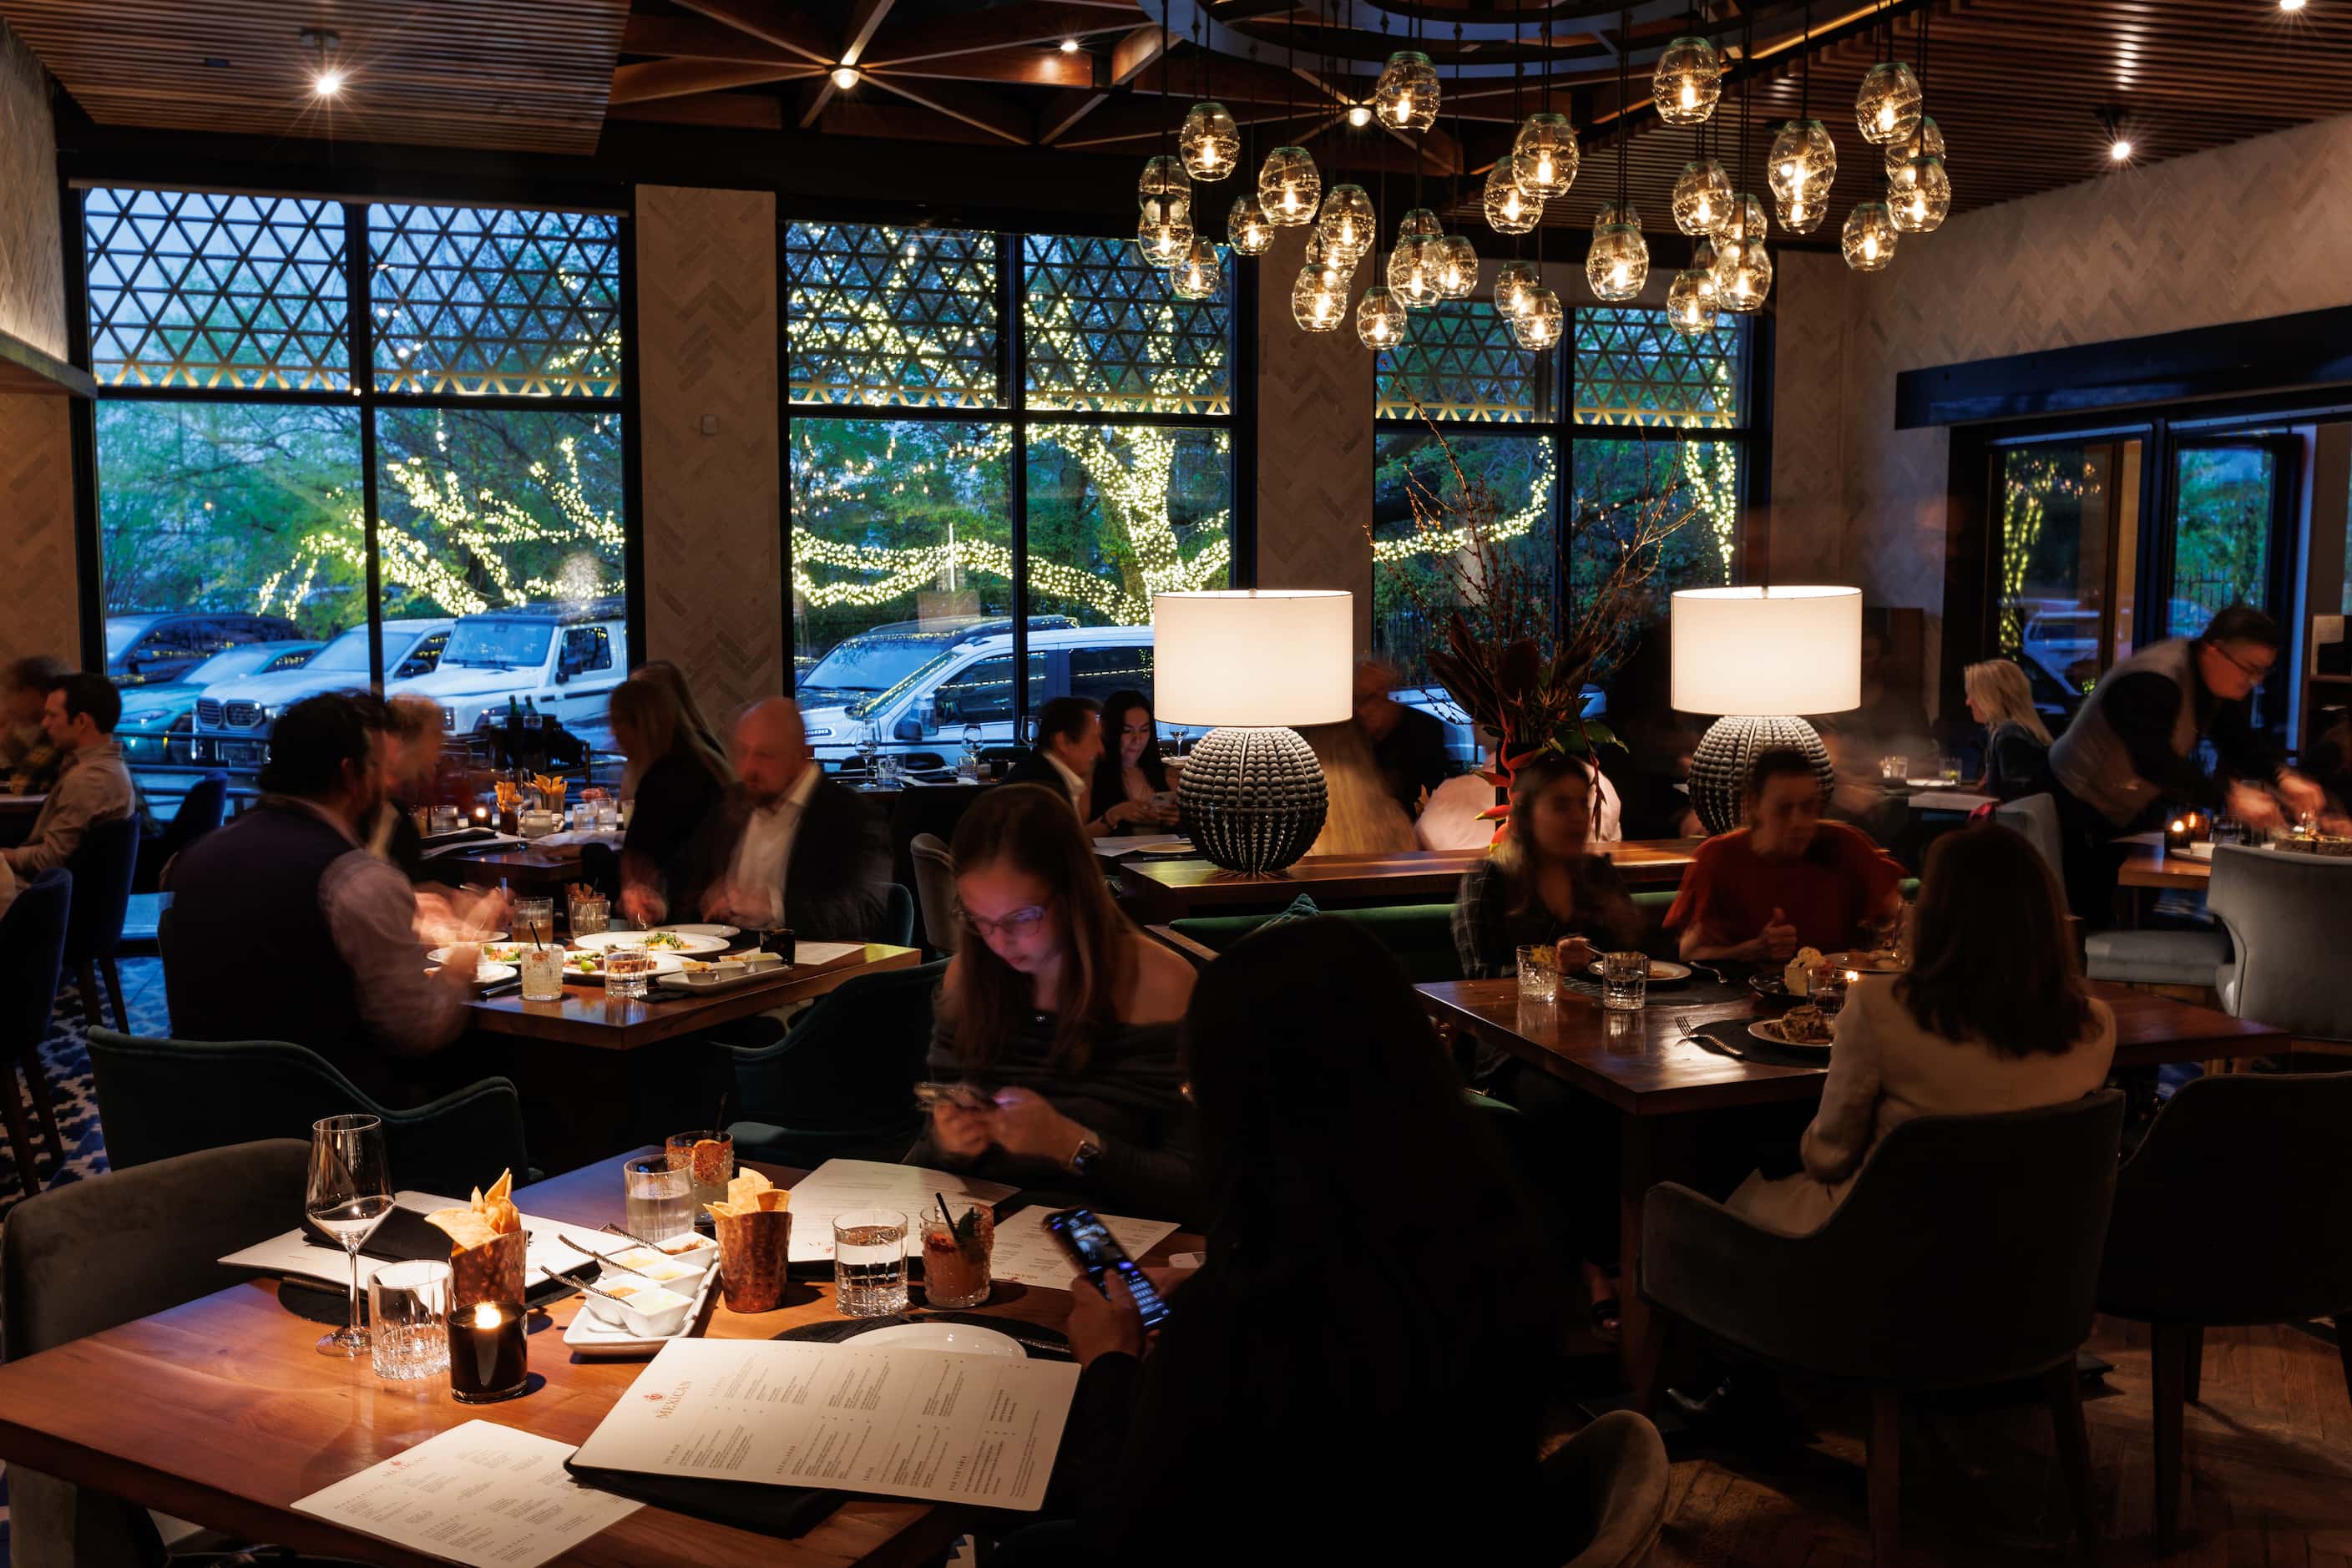 The front dining room at The Mexican shows a view out toward Turtle Creek Boulevard in the...